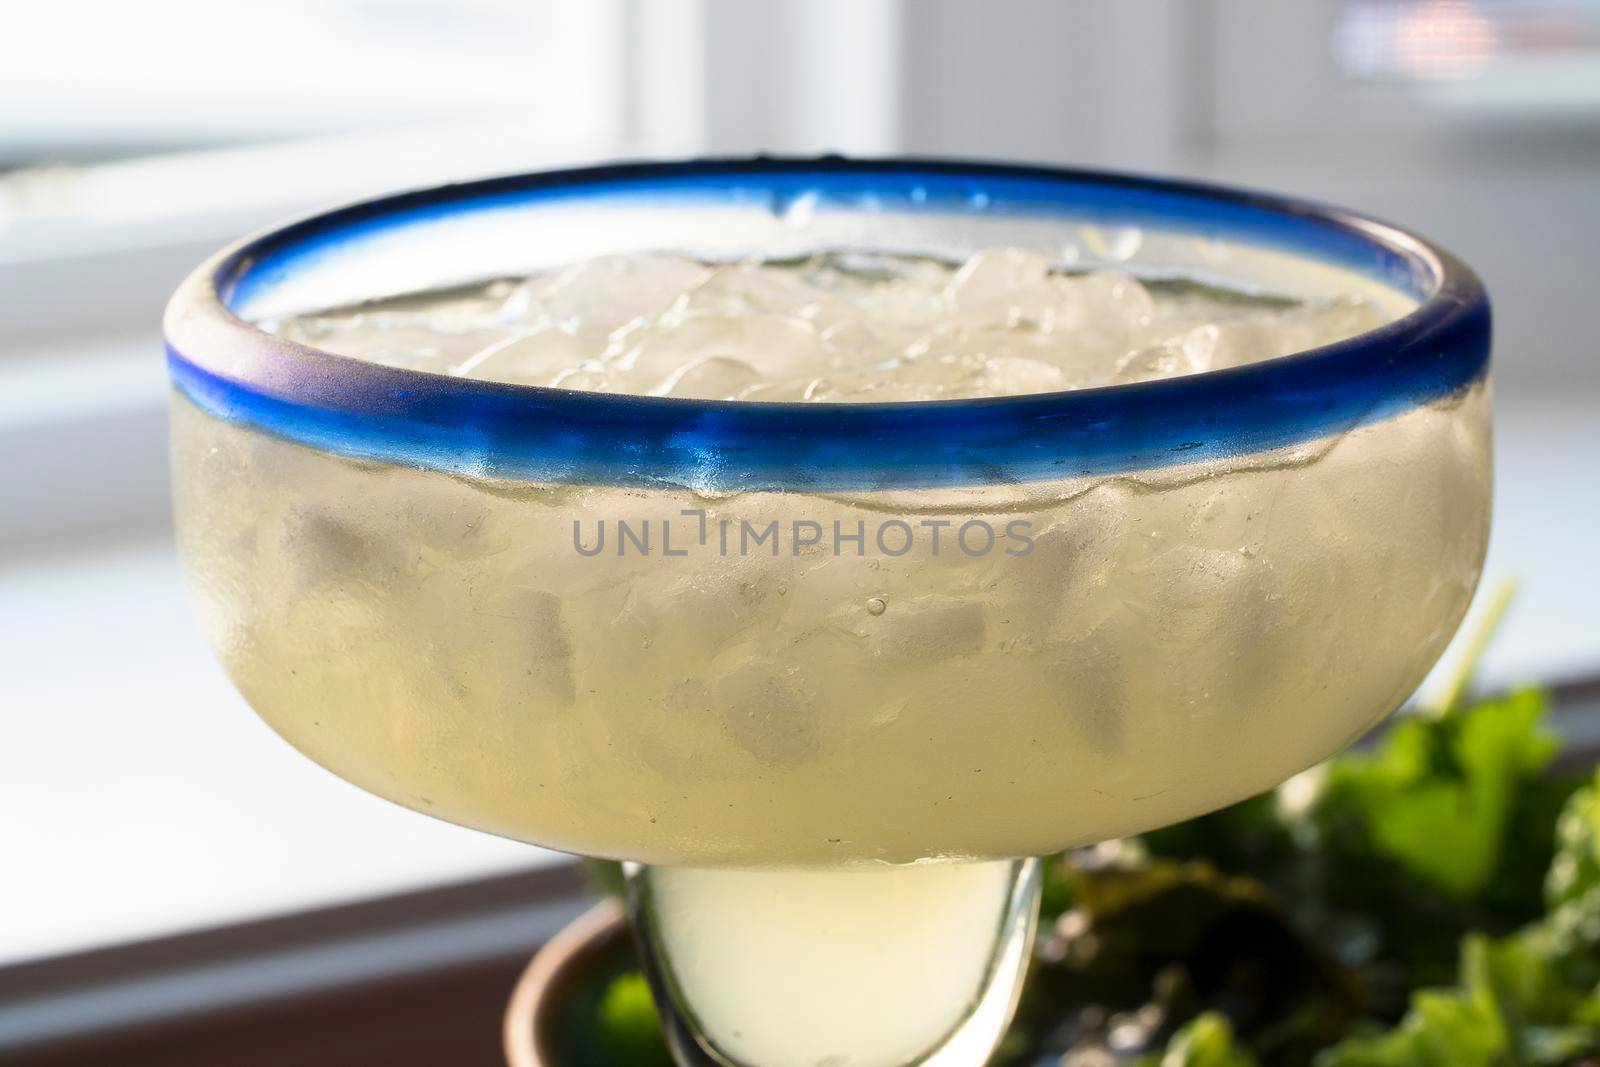 Close up of margarita on ice in glass with blue rim.